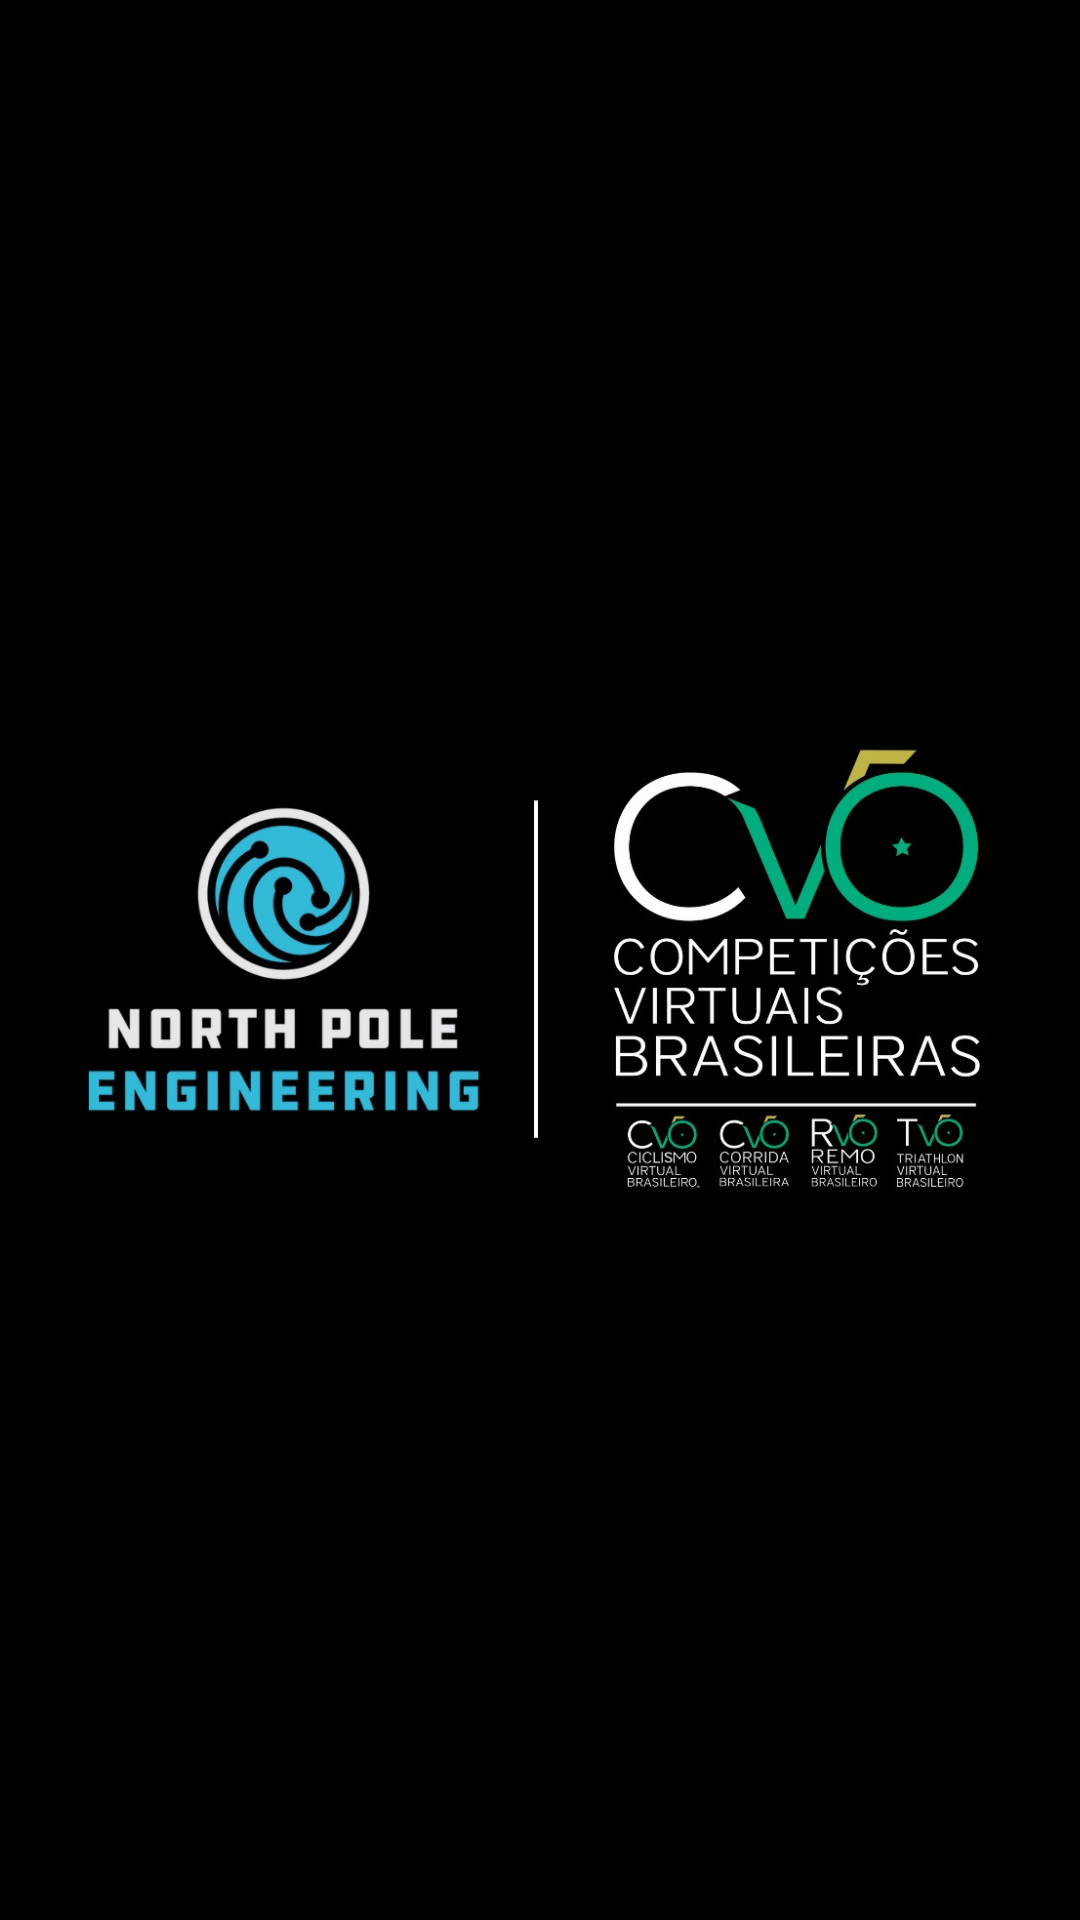 Brazilian Virtual Competitions Announces Strategic Partnership with North Pole Engineering